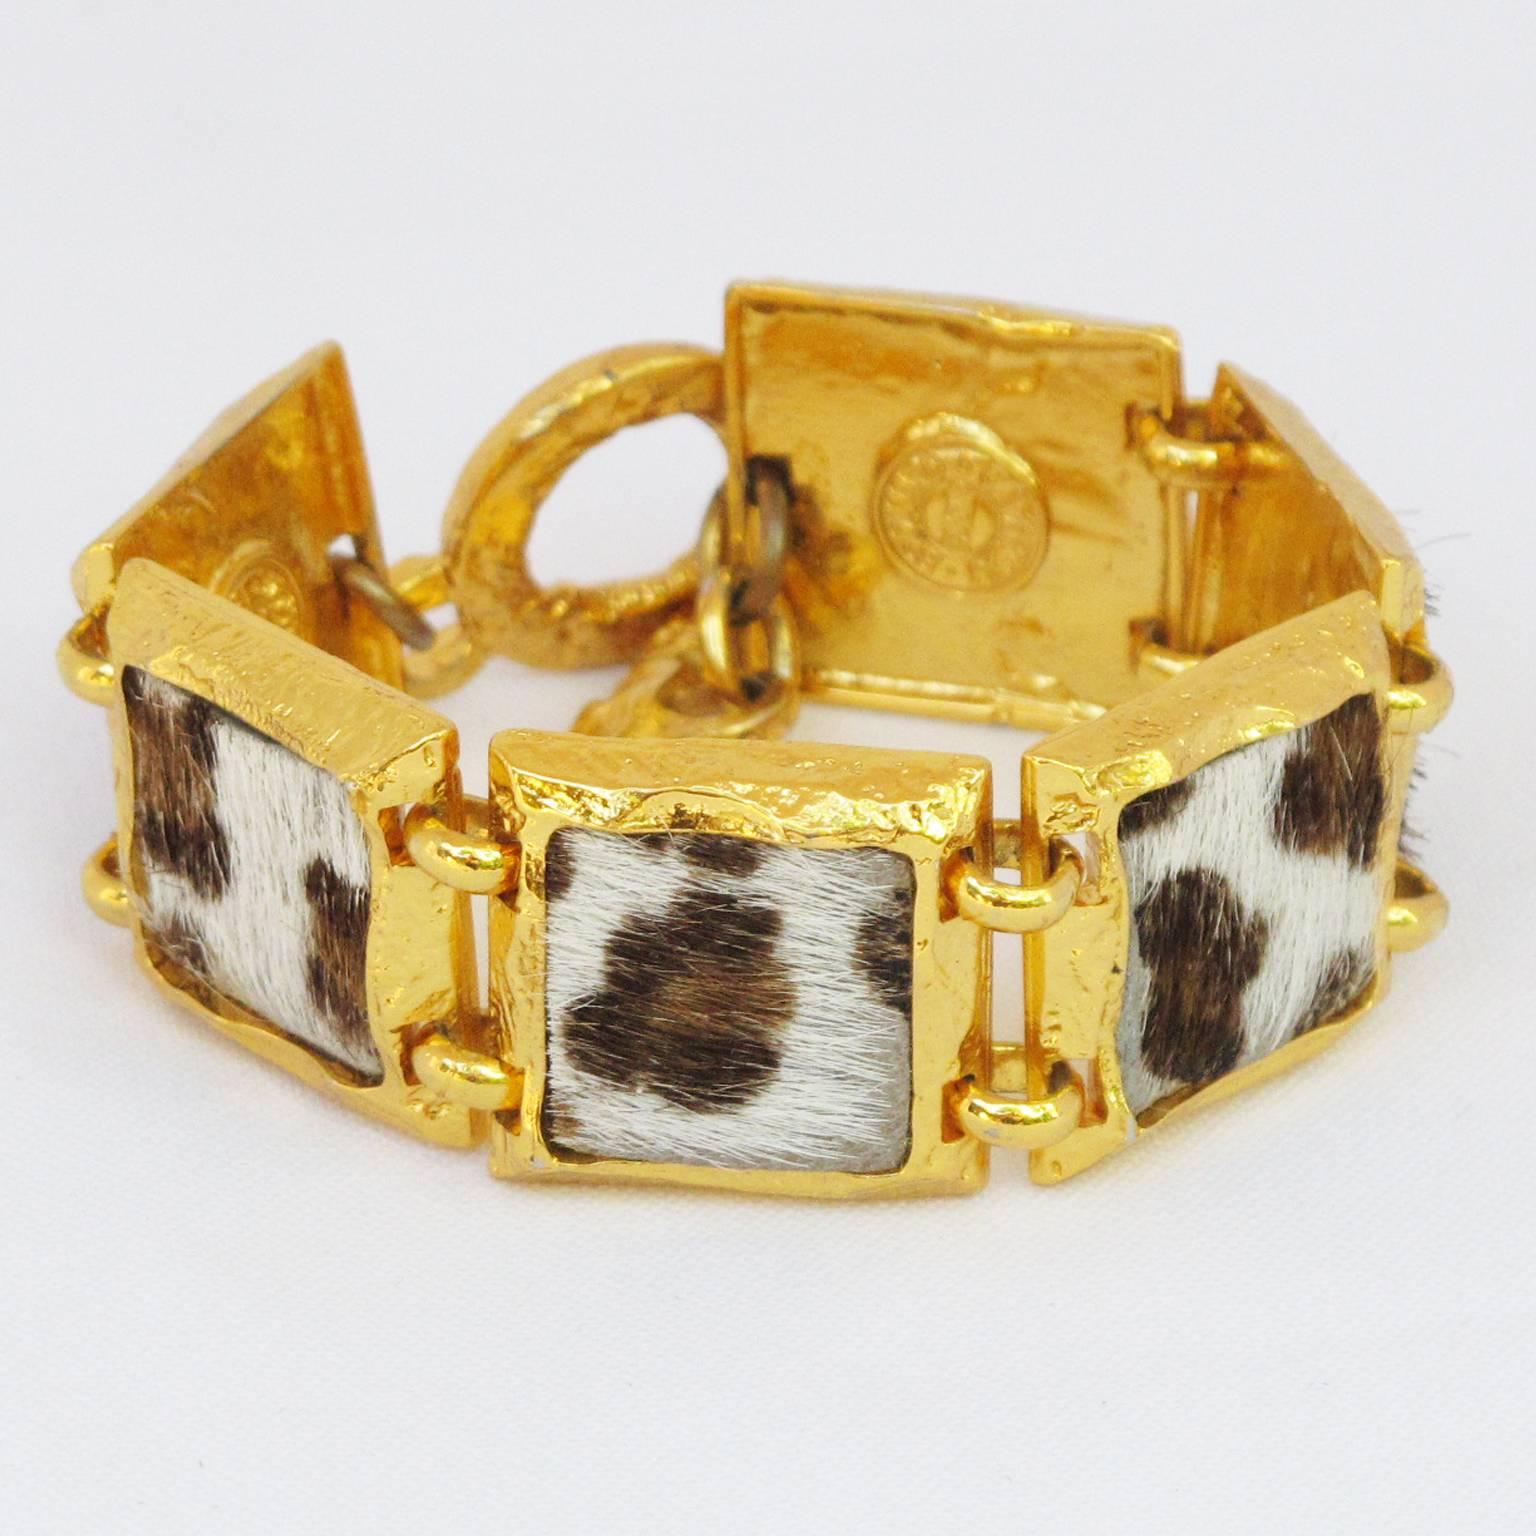 Vintage EDOUARD RAMBAUD Paris Link Bracelet. Chunky geometric square shape with gilt metal all textured topped with pony skin faux fur in a leopard pattern. Signed at the back by this wellknown French Designer. Toggle closing clasp. Excellent